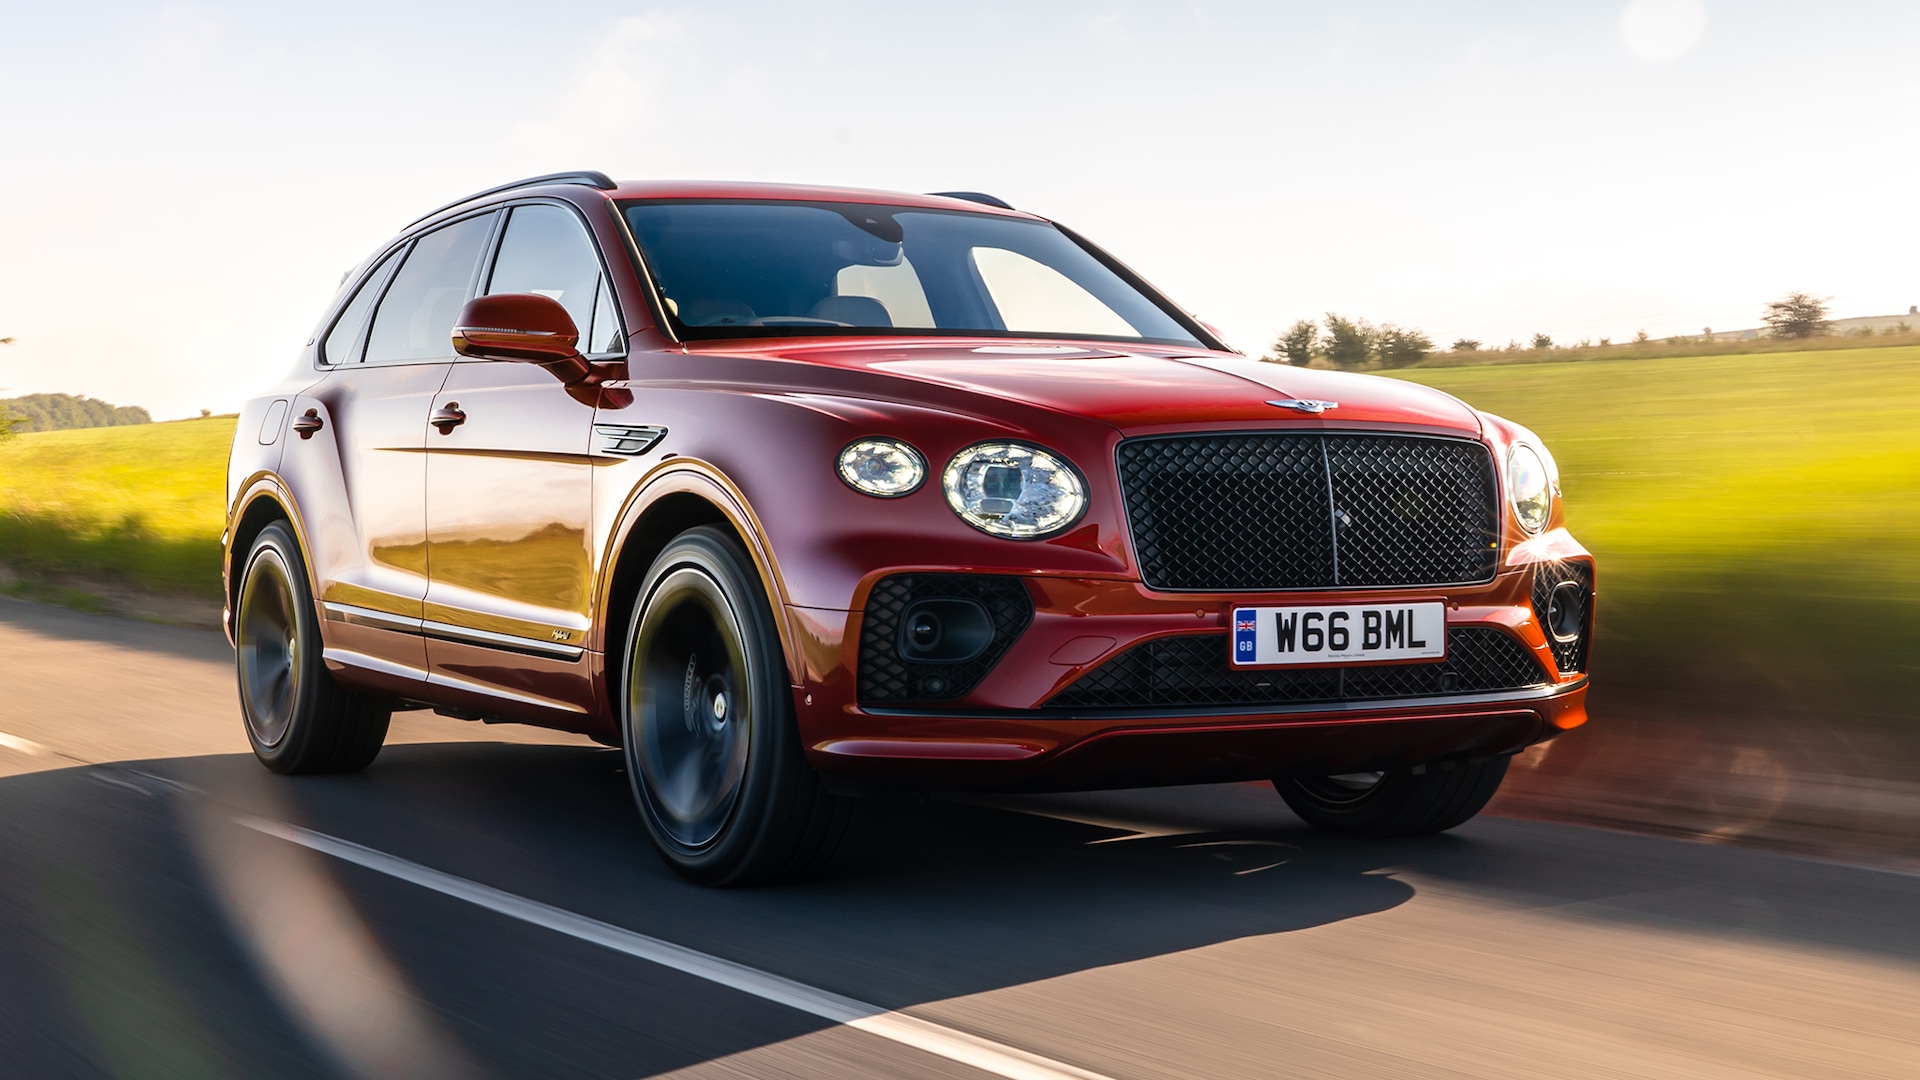 2022 Bentley Bentayga Hybrid First Drive: Not Exactly Your Typical Hybrid